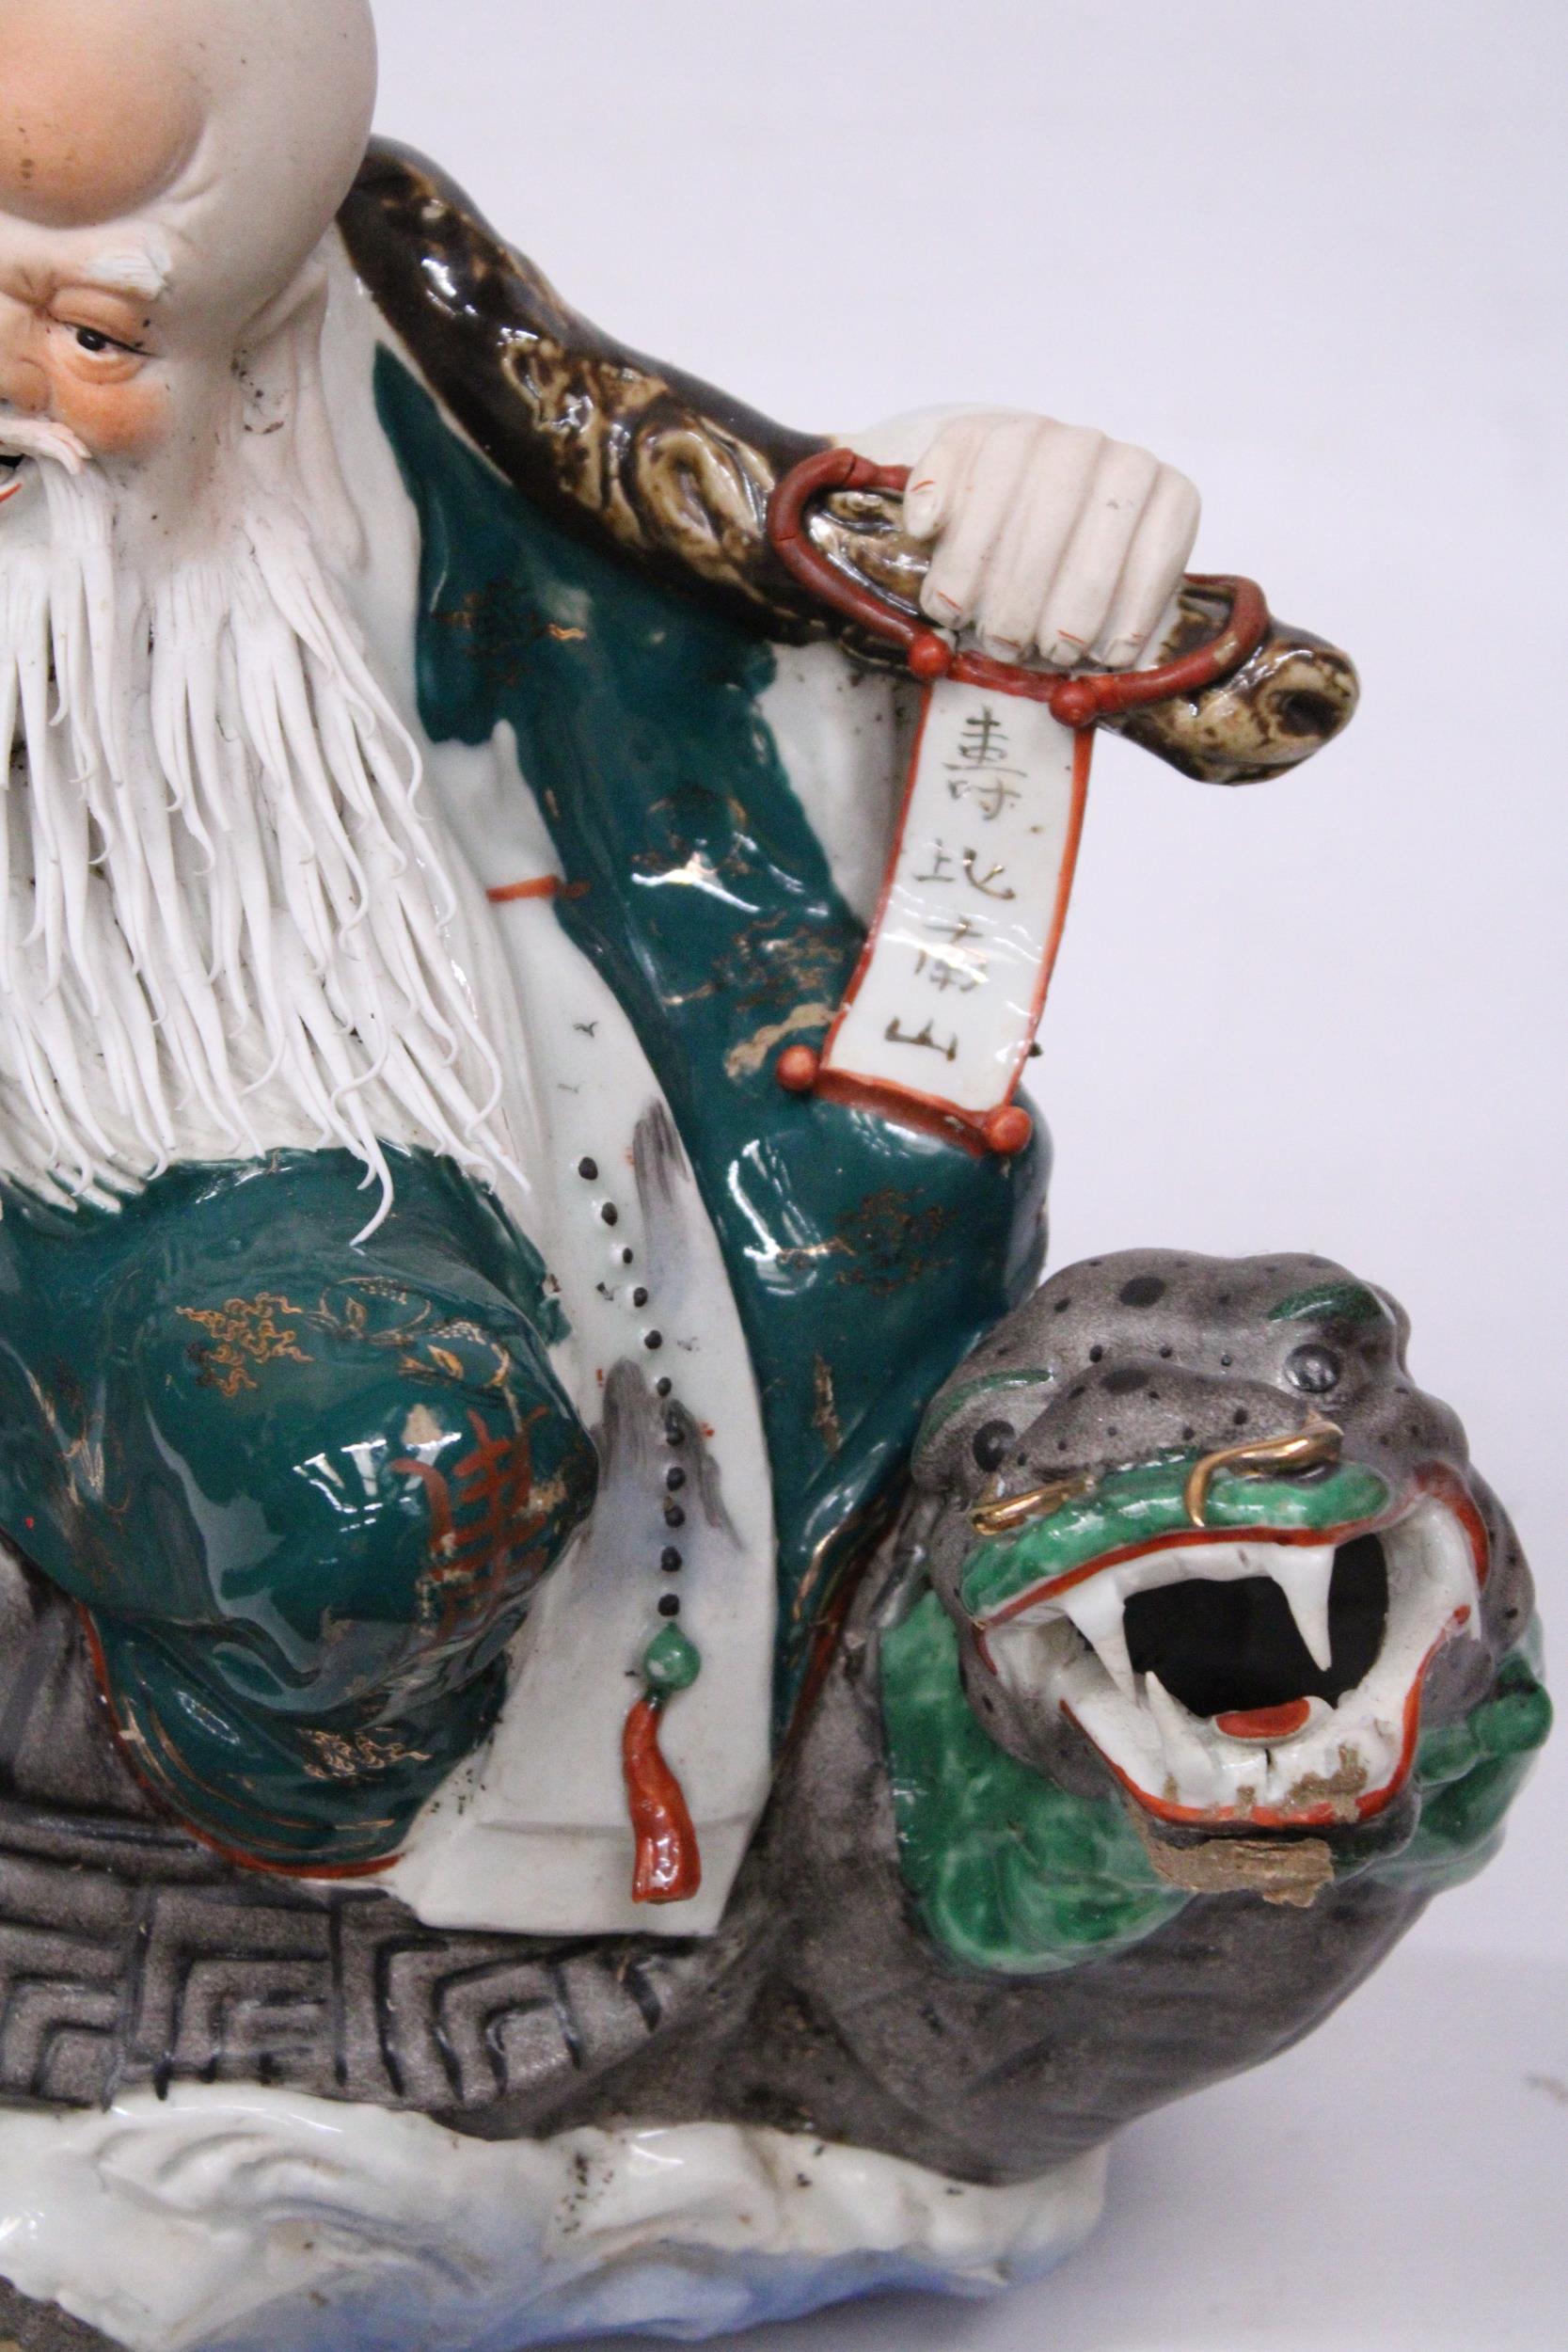 A CHINESE PORCELAIN WISE MAN RIDING A DRAGON TURTLE - Image 6 of 7